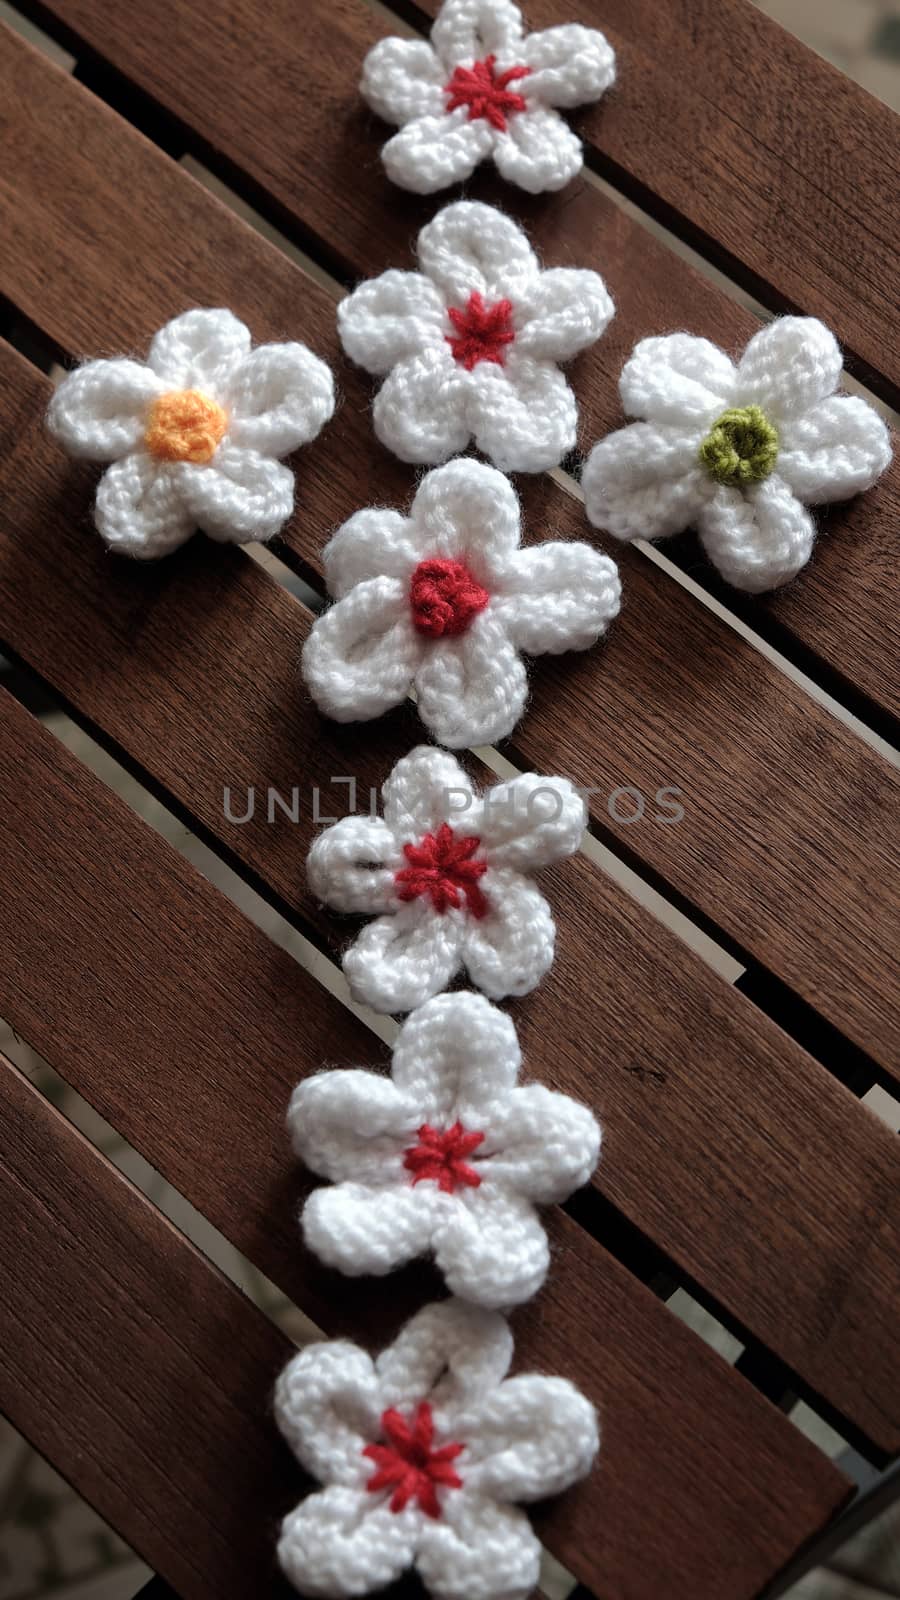 knit daisy flower on wood background by xuanhuongho